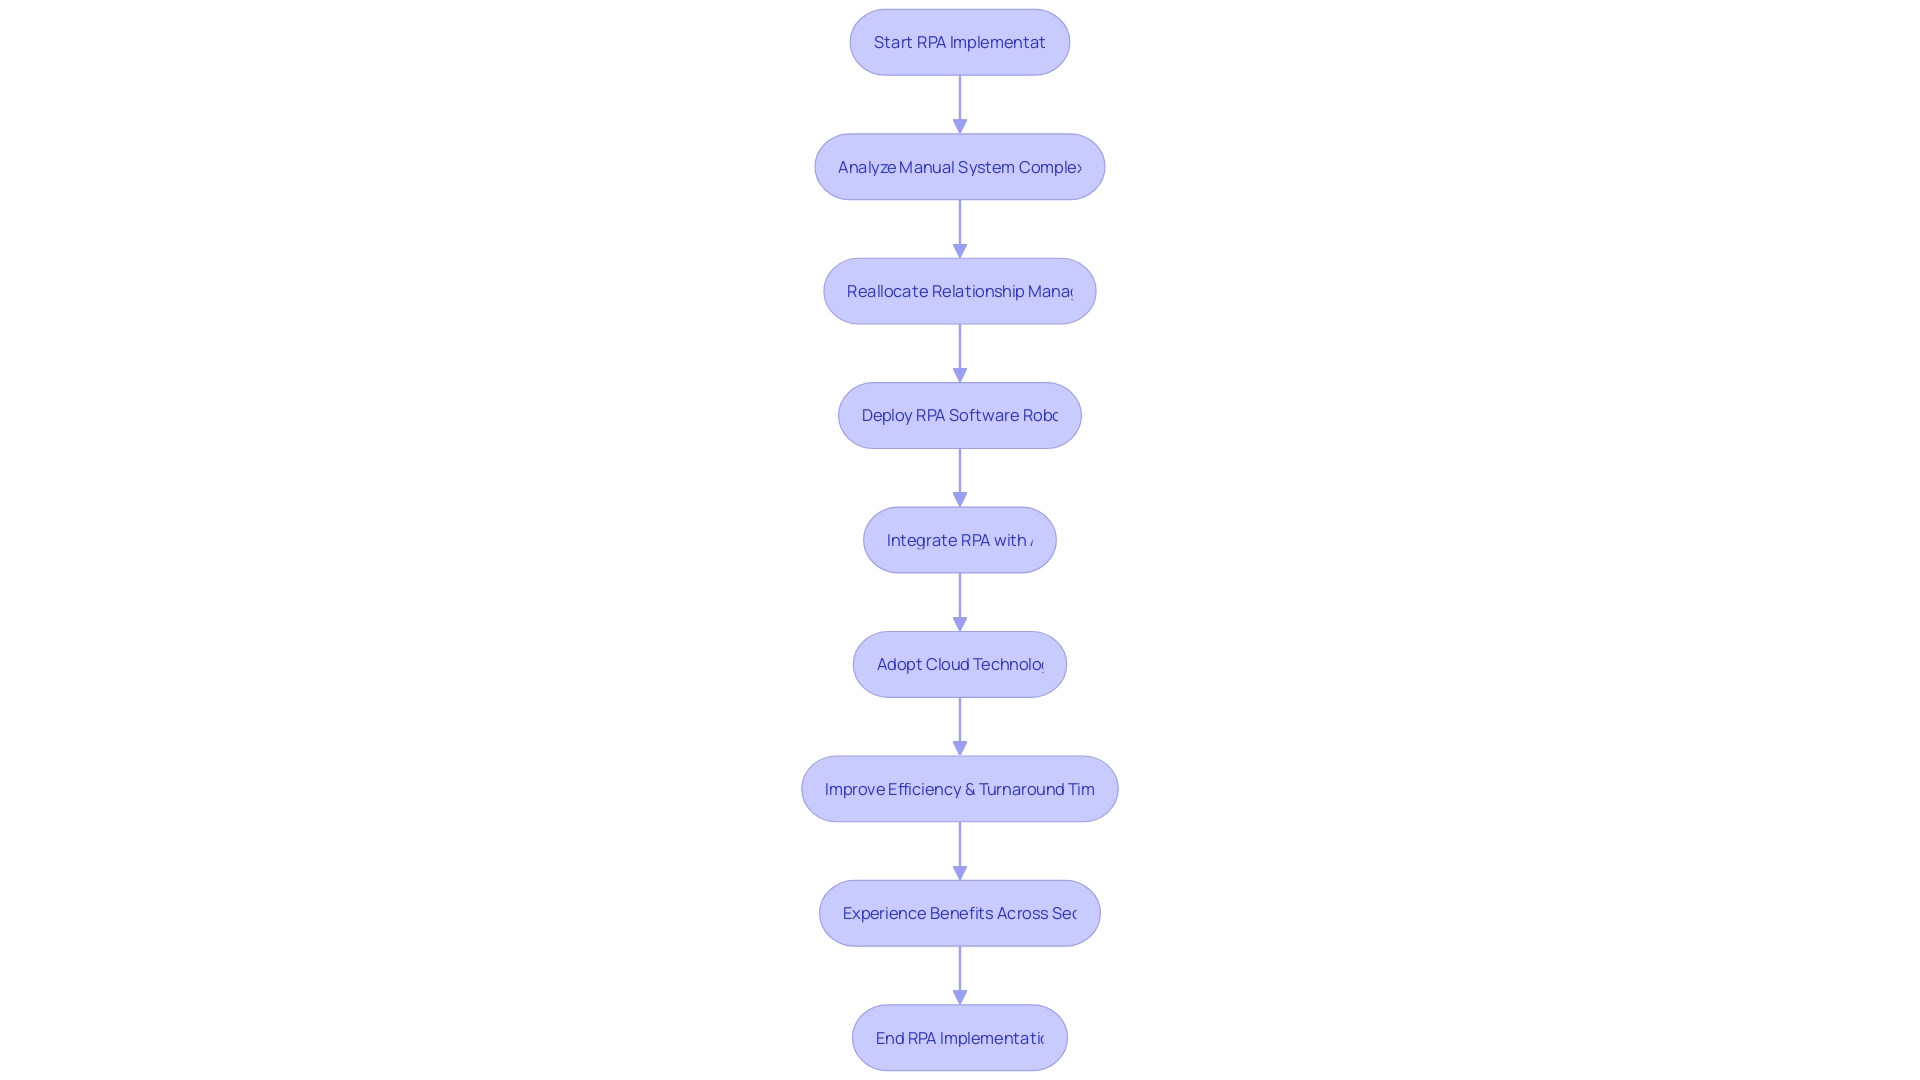 Process Flowchart of RPA Implementation in the Banking Sector